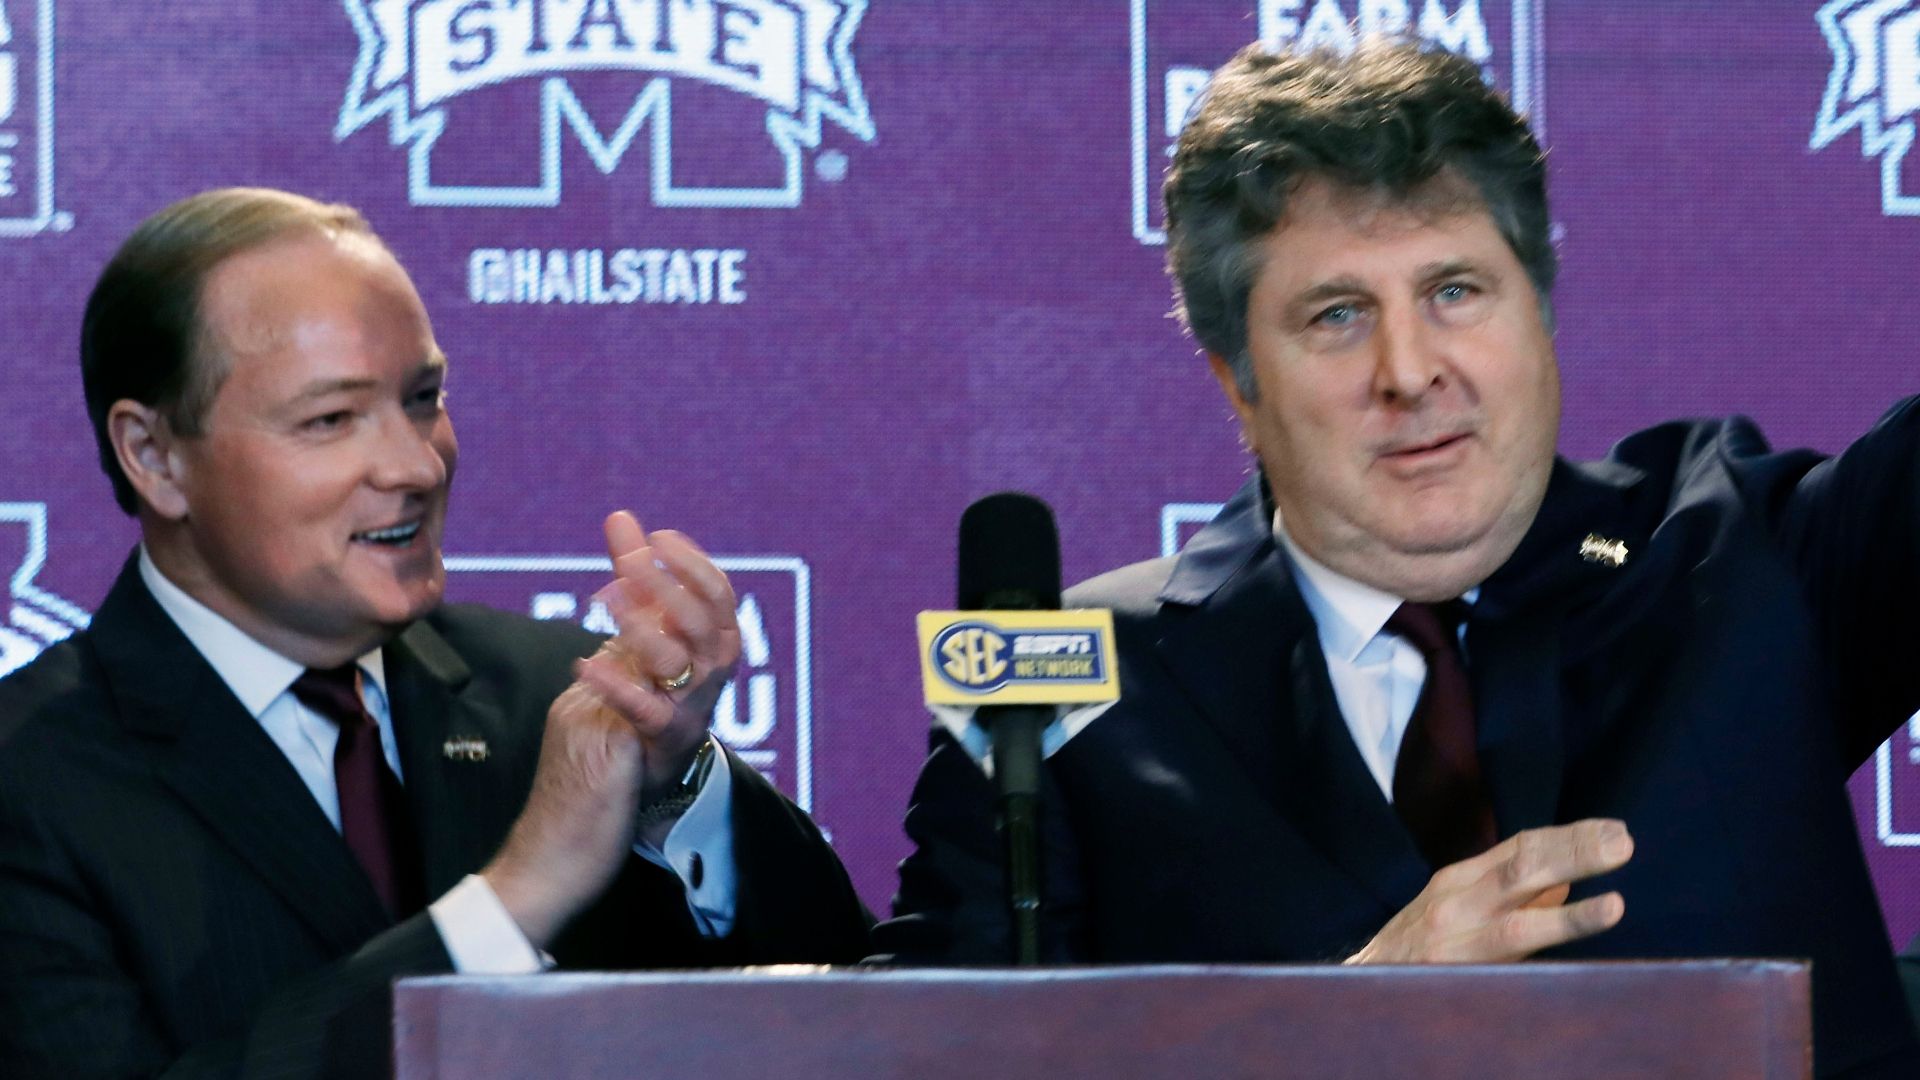 MS State's Keenum highlights Leach's 'national persona'